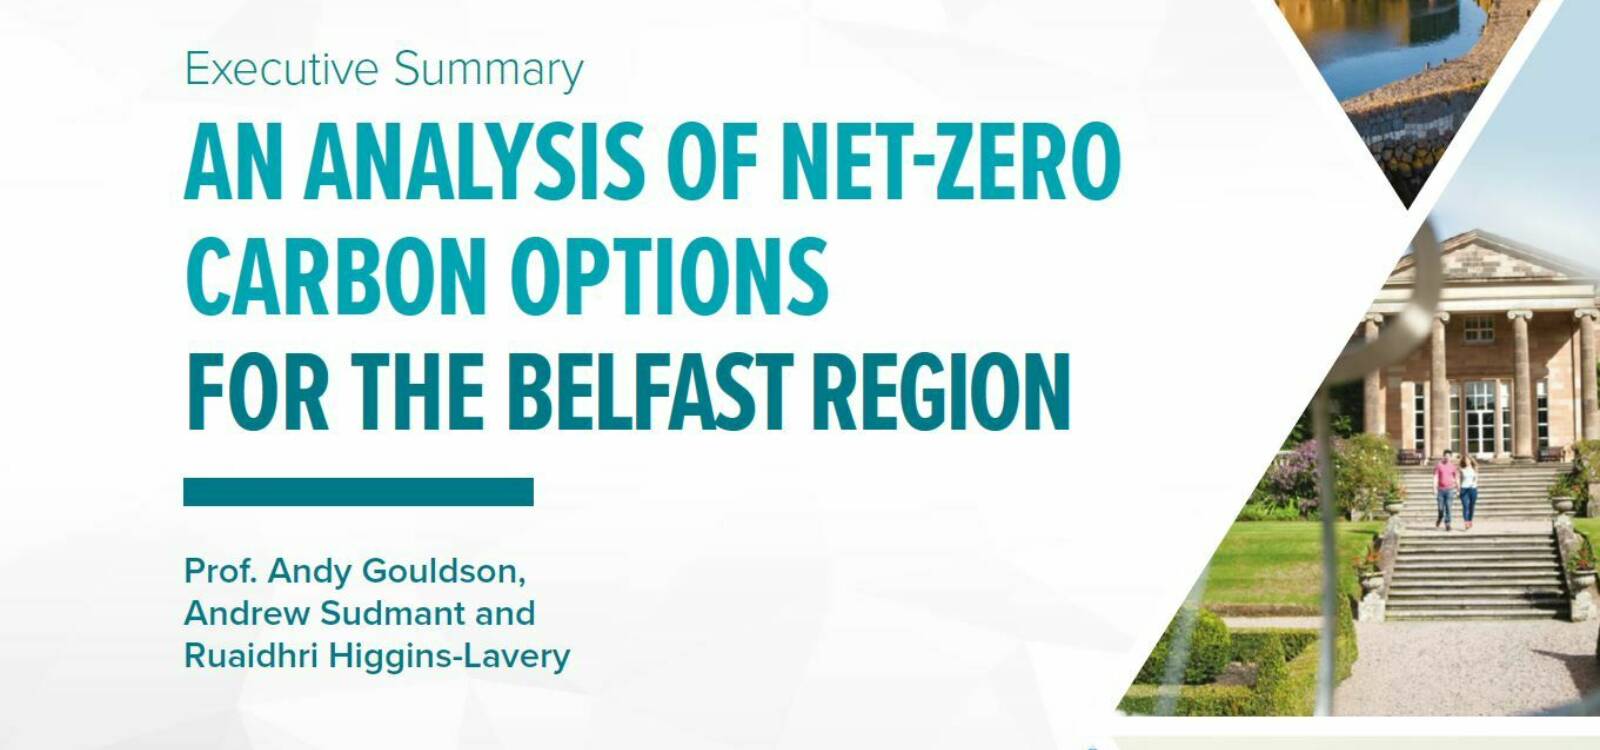 An Analysis of Net-Zero Carbon Options for the Belfast Region - Executive Summary view publication